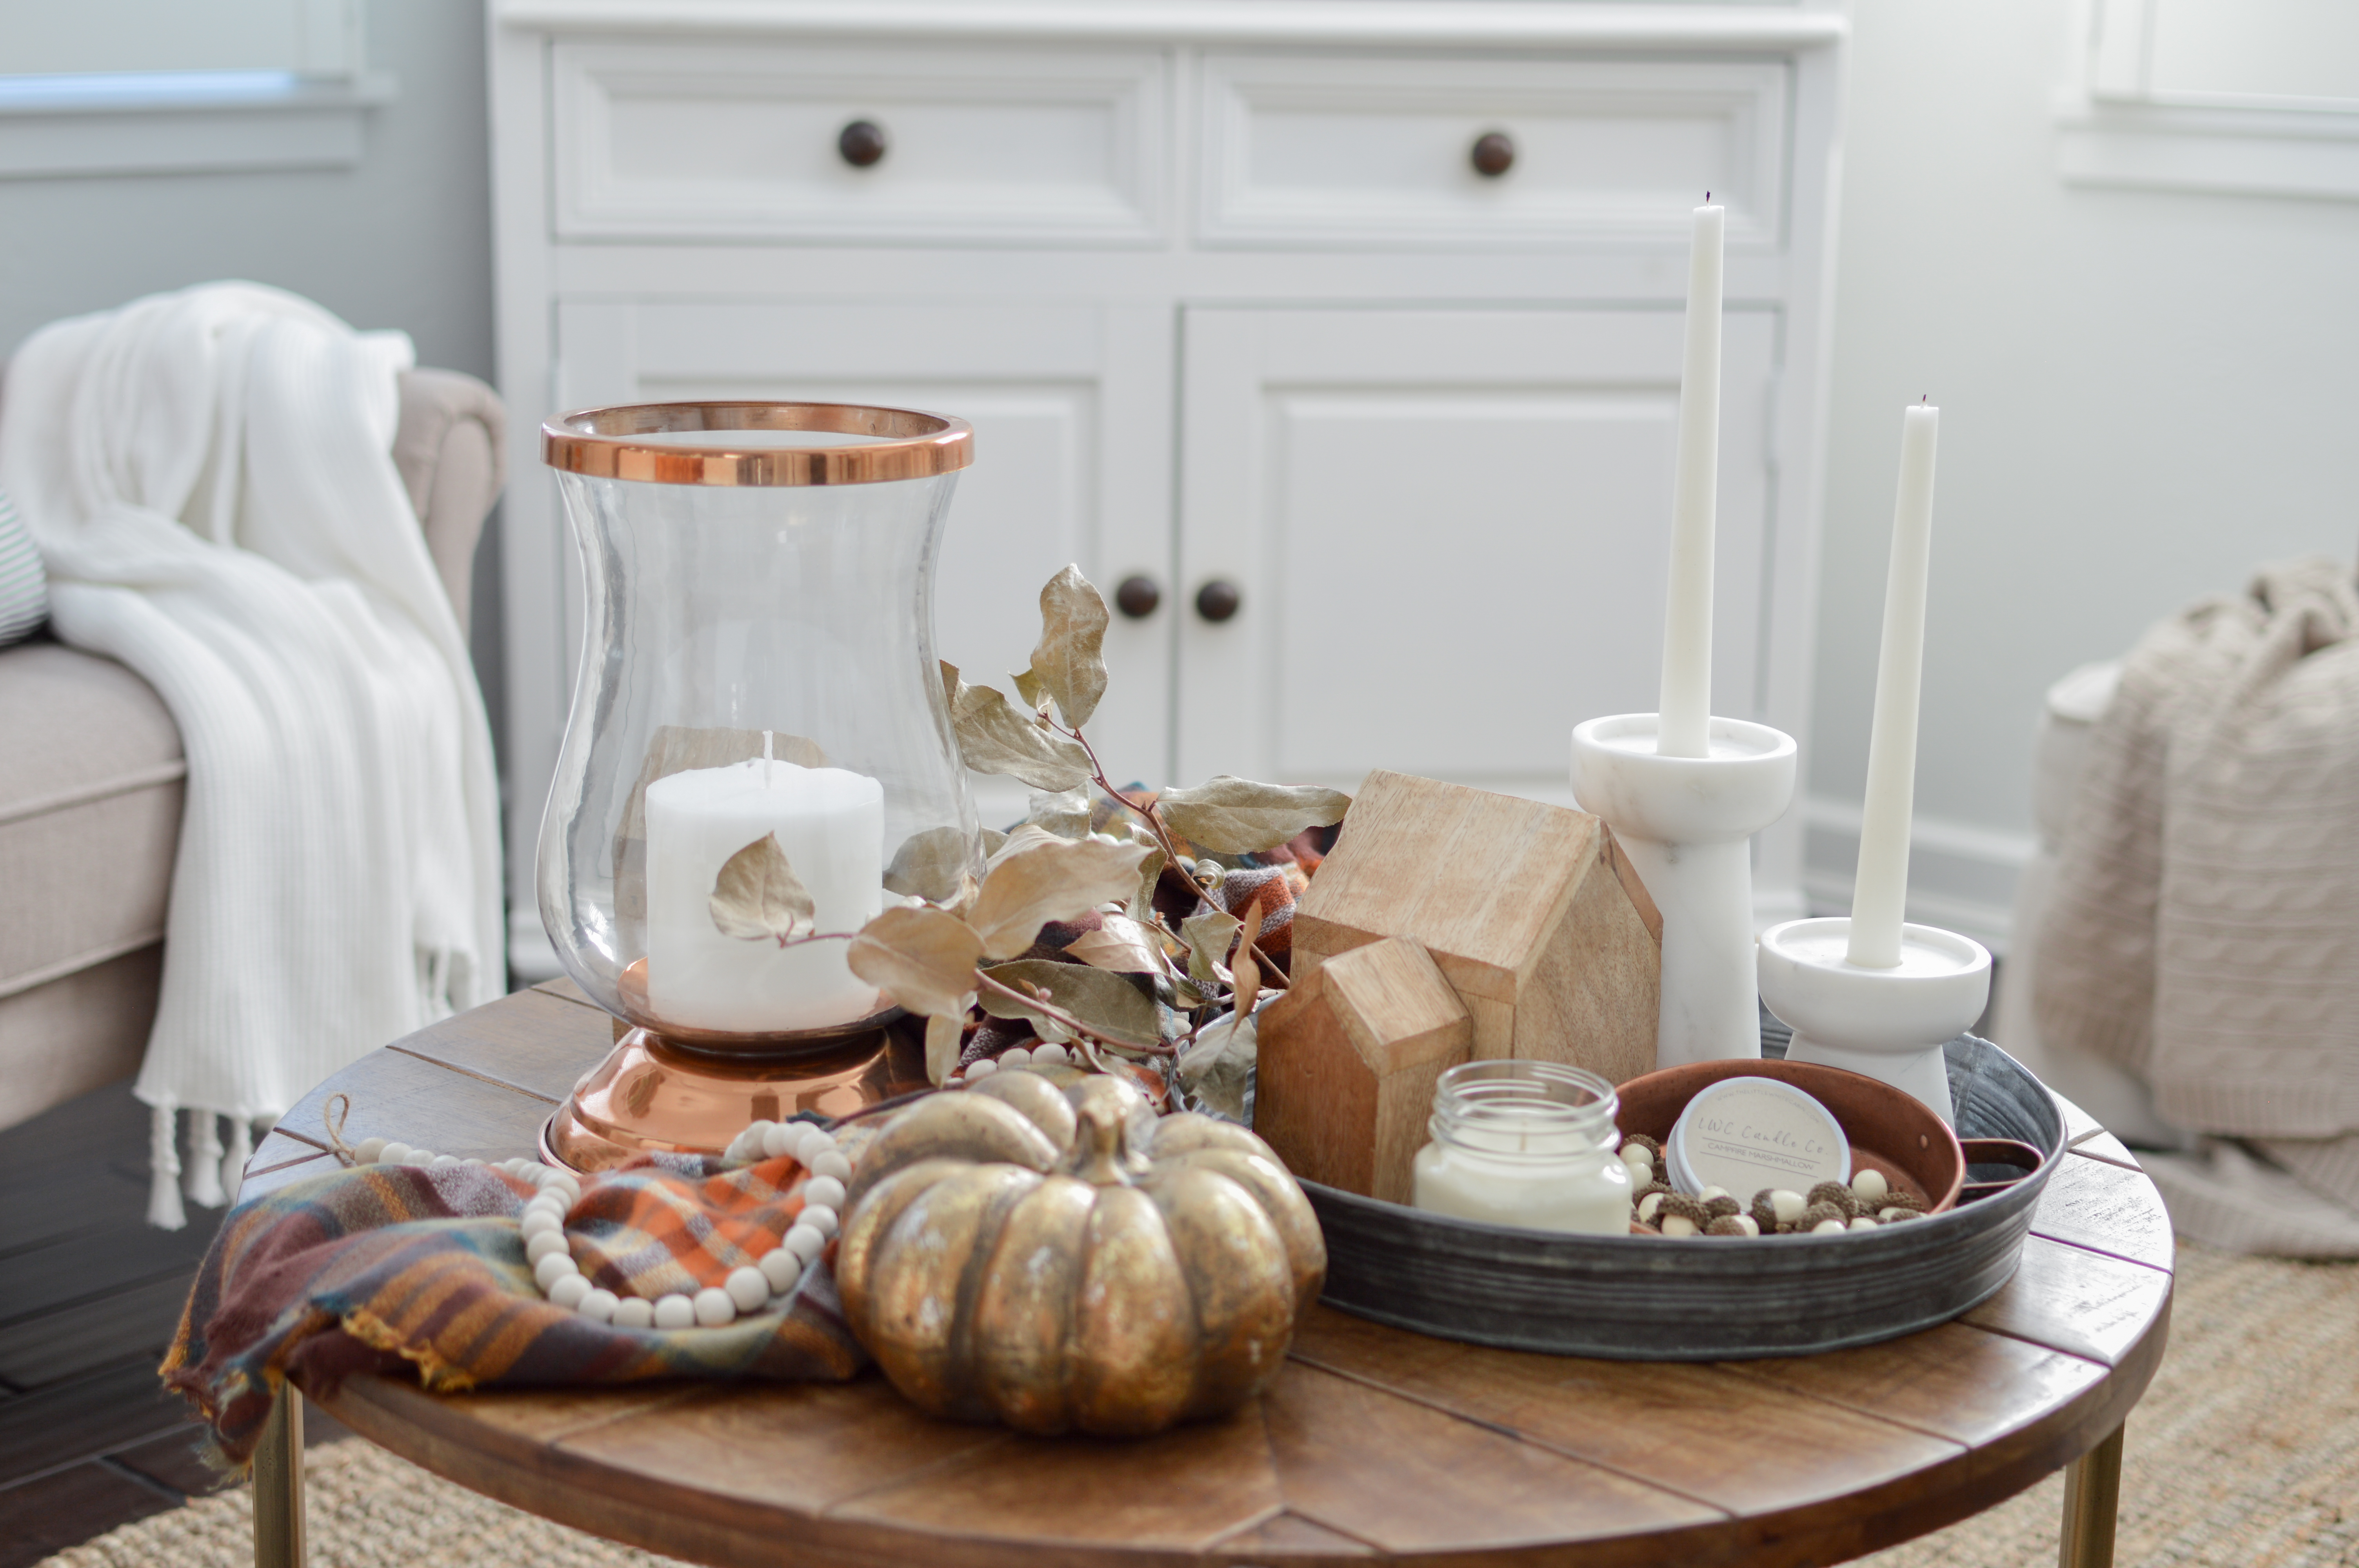 https://foxhollowcottage.com/wp-content/uploads/2019/10/Casual-Cottage-Living-Dining-Room-dressed-for-Fall-in-bright-white-neutrals-and-Autumn-color-www.foxhollowcottage.com_-43.jpg